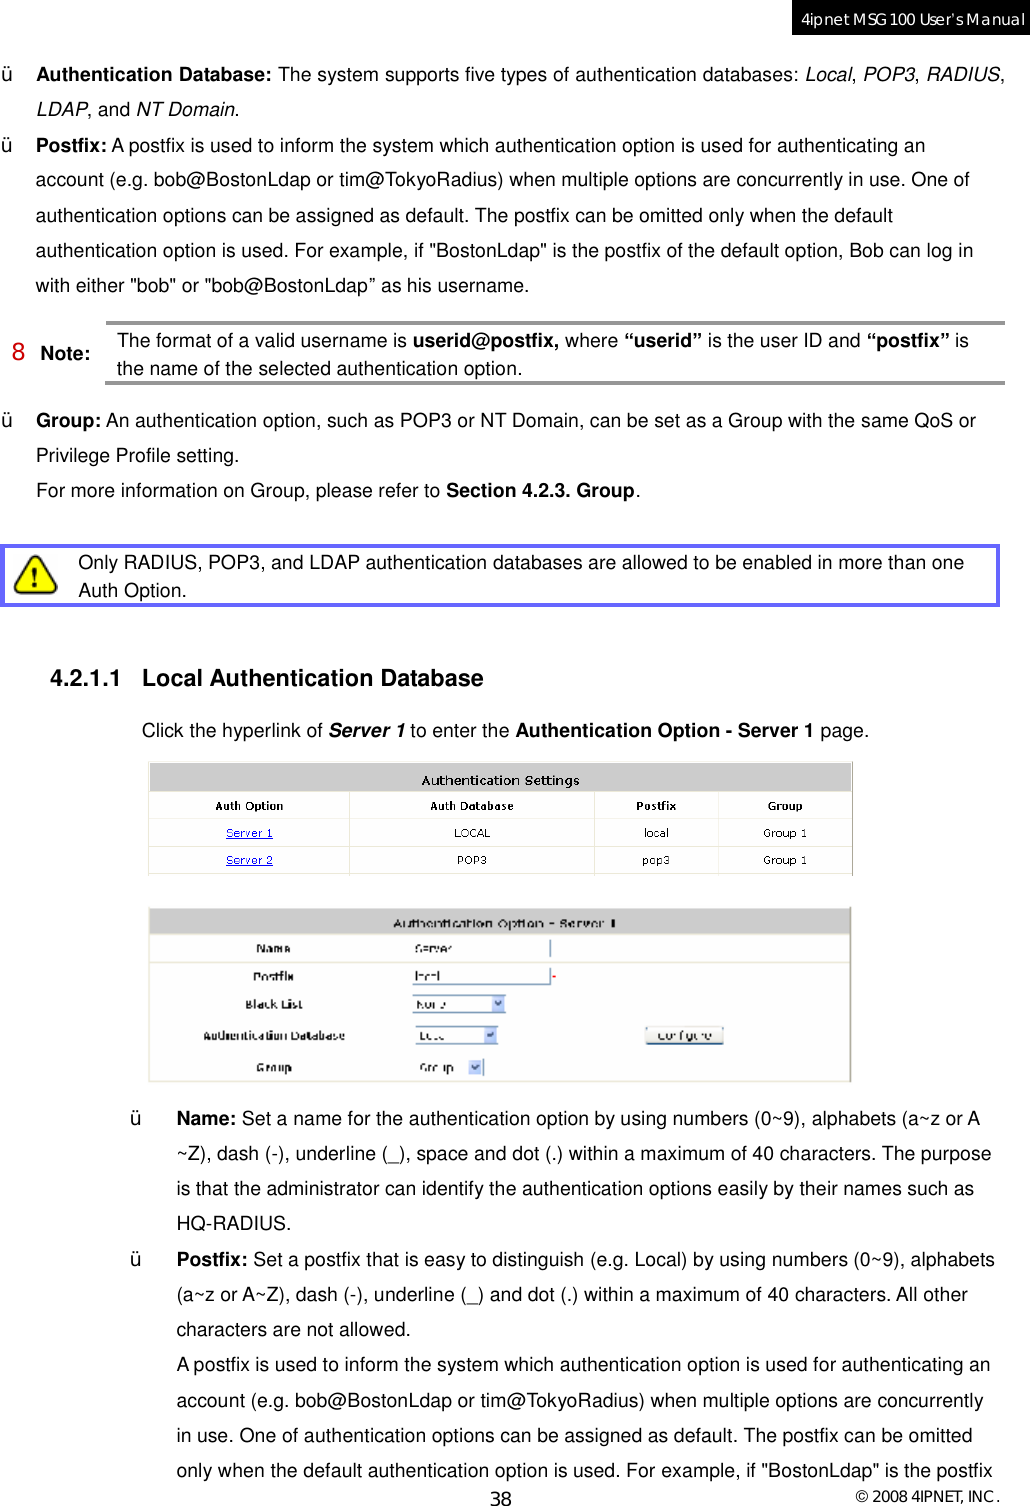  © 2008 4IPNET, INC. 38 4ipnet MSG100 User’s Manual  Ÿ Authentication Database: The system supports five types of authentication databases: Local, POP3, RADIUS, LDAP, and NT Domain. Ÿ Postfix: A postfix is used to inform the system which authentication option is used for authenticating an account (e.g. bob@BostonLdap or tim@TokyoRadius) when multiple options are concurrently in use. One of authentication options can be assigned as default. The postfix can be omitted only when the default authentication option is used. For example, if &quot;BostonLdap&quot; is the postfix of the default option, Bob can log in with either &quot;bob&quot; or &quot;bob@BostonLdap” as his username. 8 Note: The format of a valid username is userid@postfix, where “userid” is the user ID and “postfix” is the name of the selected authentication option. Ÿ Group: An authentication option, such as POP3 or NT Domain, can be set as a Group with the same QoS or Privilege Profile setting.  For more information on Group, please refer to Section 4.2.3. Group.   Only RADIUS, POP3, and LDAP authentication databases are allowed to be enabled in more than one Auth Option.  4.2.1.1 Local Authentication Database Click the hyperlink of Server 1 to enter the Authentication Option - Server 1 page.   Ÿ Name: Set a name for the authentication option by using numbers (0~9), alphabets (a~z or A ~Z), dash (-), underline (_), space and dot (.) within a maximum of 40 characters. The purpose is that the administrator can identify the authentication options easily by their names such as HQ-RADIUS. Ÿ Postfix: Set a postfix that is easy to distinguish (e.g. Local) by using numbers (0~9), alphabets (a~z or A~Z), dash (-), underline (_) and dot (.) within a maximum of 40 characters. All other characters are not allowed.  A postfix is used to inform the system which authentication option is used for authenticating an account (e.g. bob@BostonLdap or tim@TokyoRadius) when multiple options are concurrently in use. One of authentication options can be assigned as default. The postfix can be omitted only when the default authentication option is used. For example, if &quot;BostonLdap&quot; is the postfix 